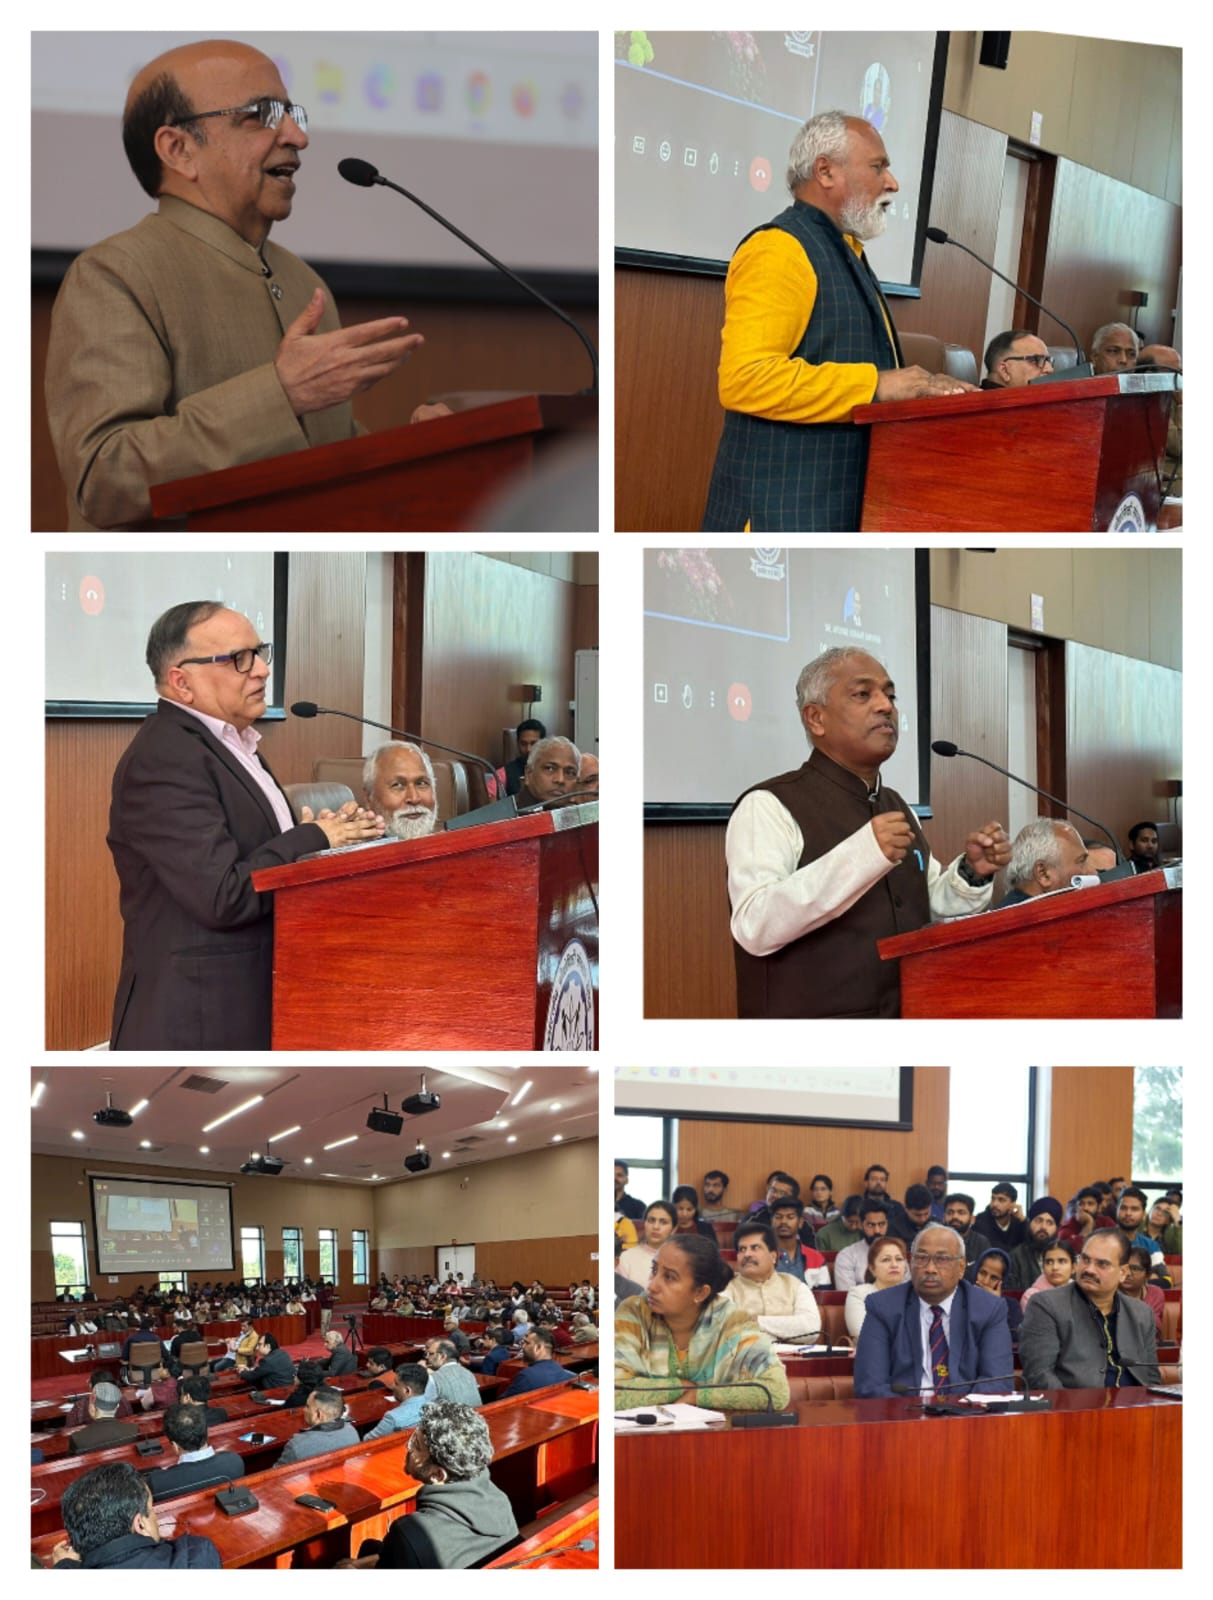 Distinguished educationists and thinkers shared their insights on "Prosperity in Education" during the "Punjab Samvad" program held at the Indian Institute of Technology, Ropar.